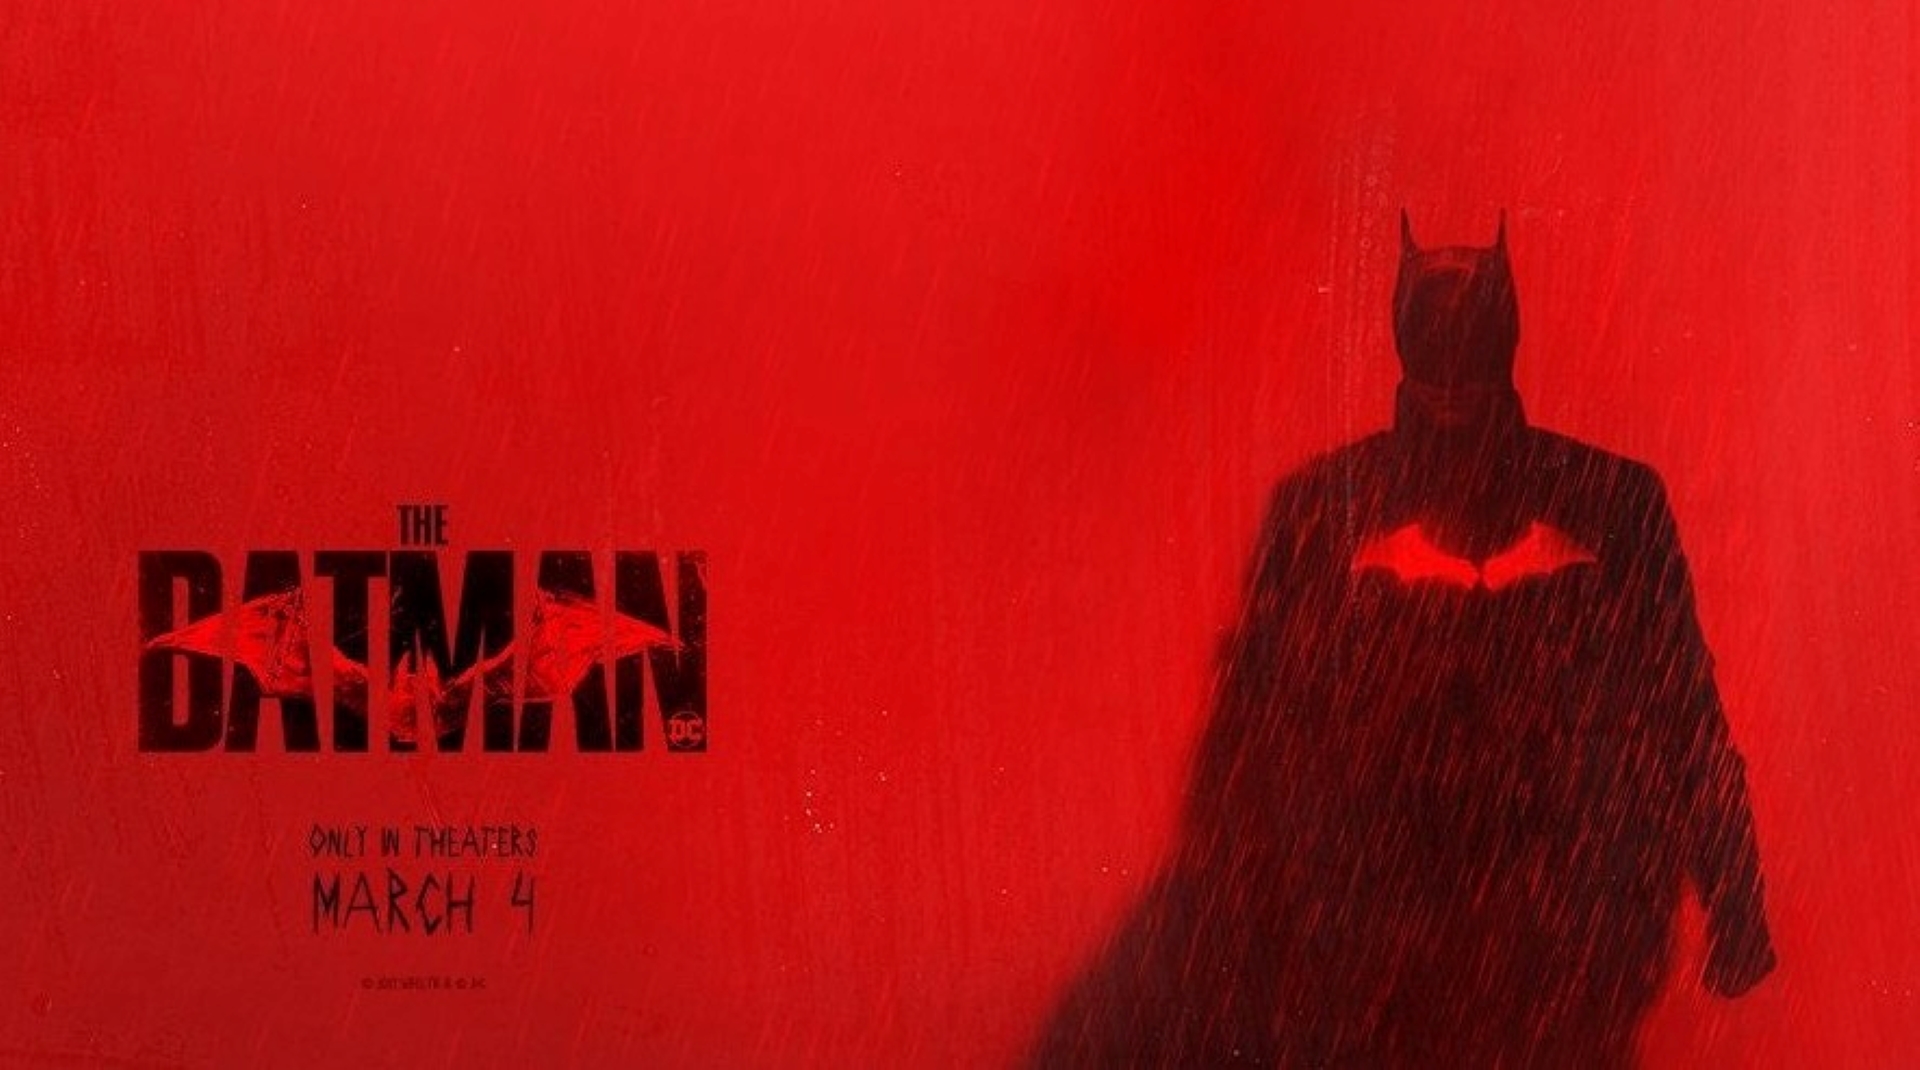 Romancing The Shadow – The Batman (Matt Reeves, 2022) or The Exile of Darkness